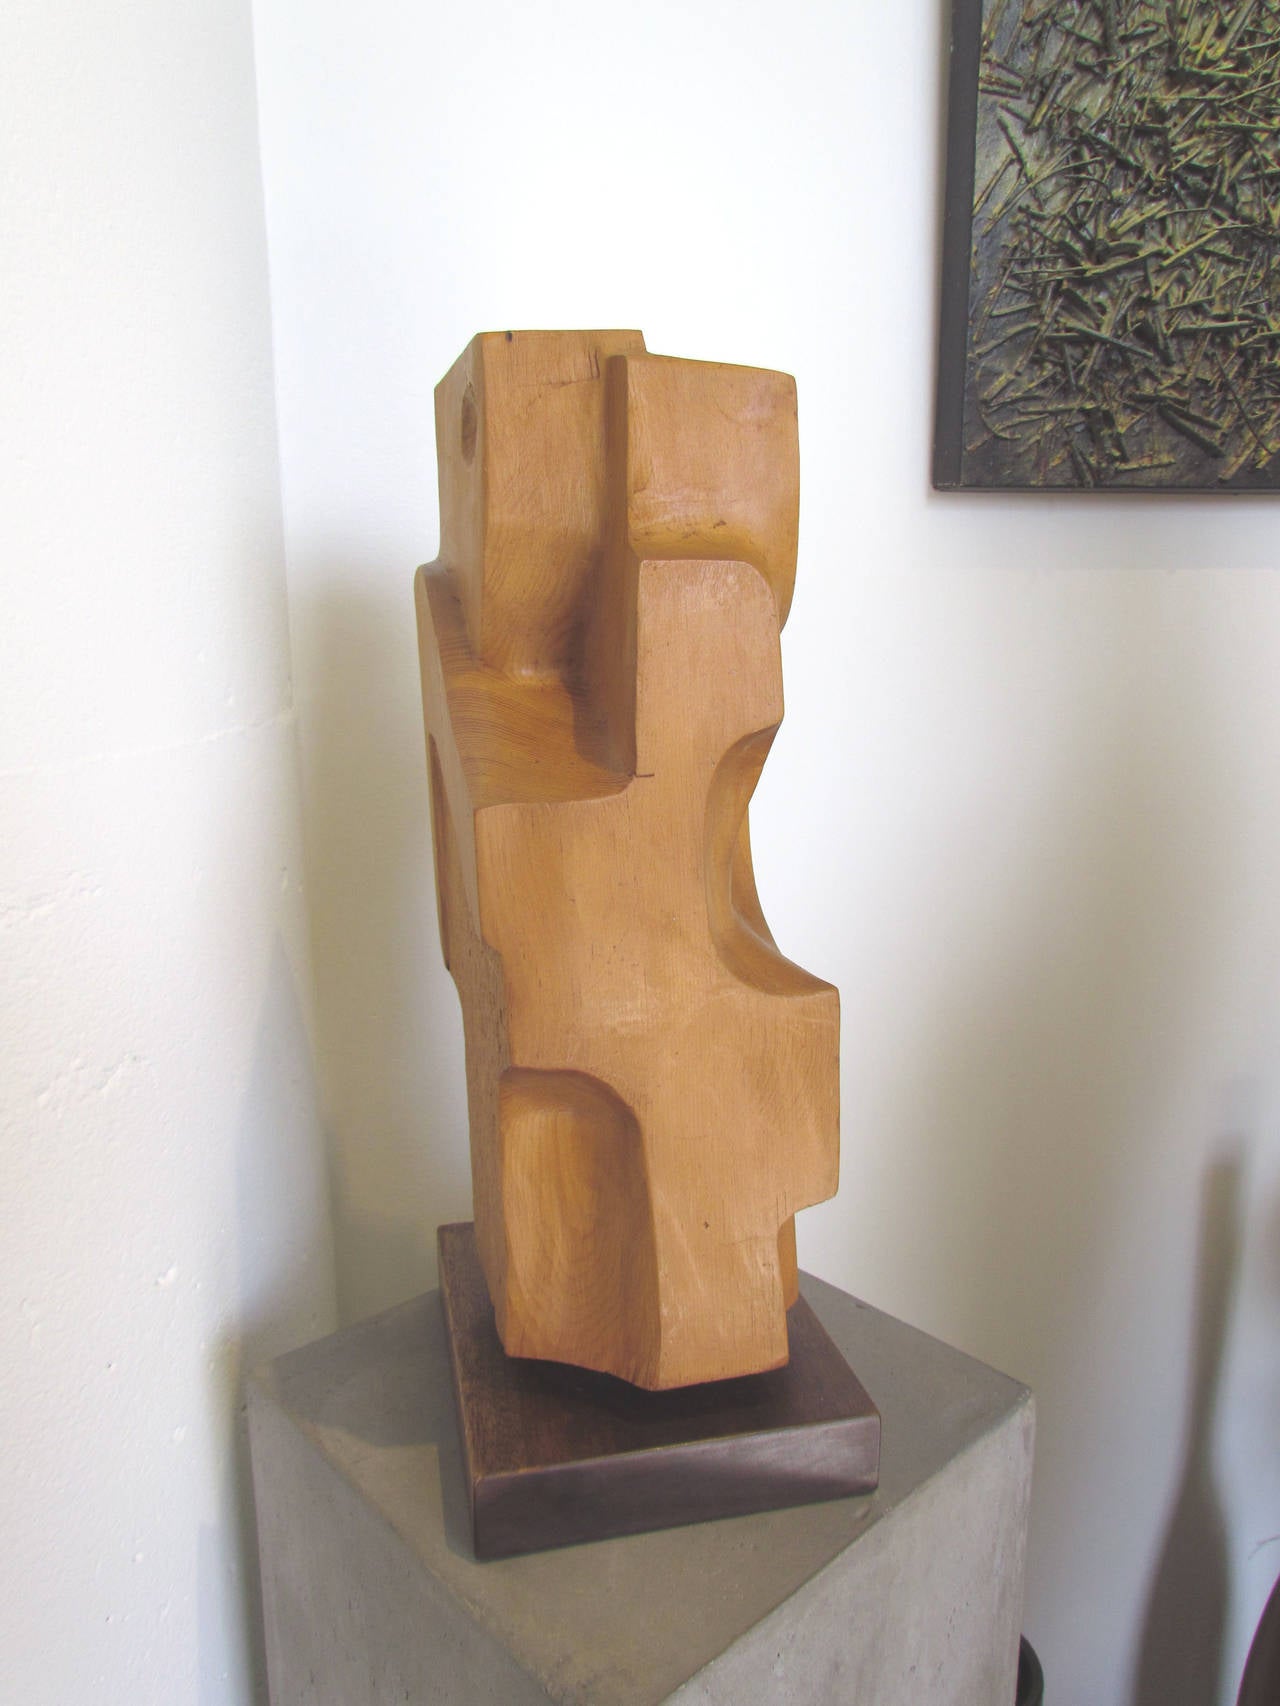 American Abstract Hand-Carved Wood Sculpture Signed and Dated 1971